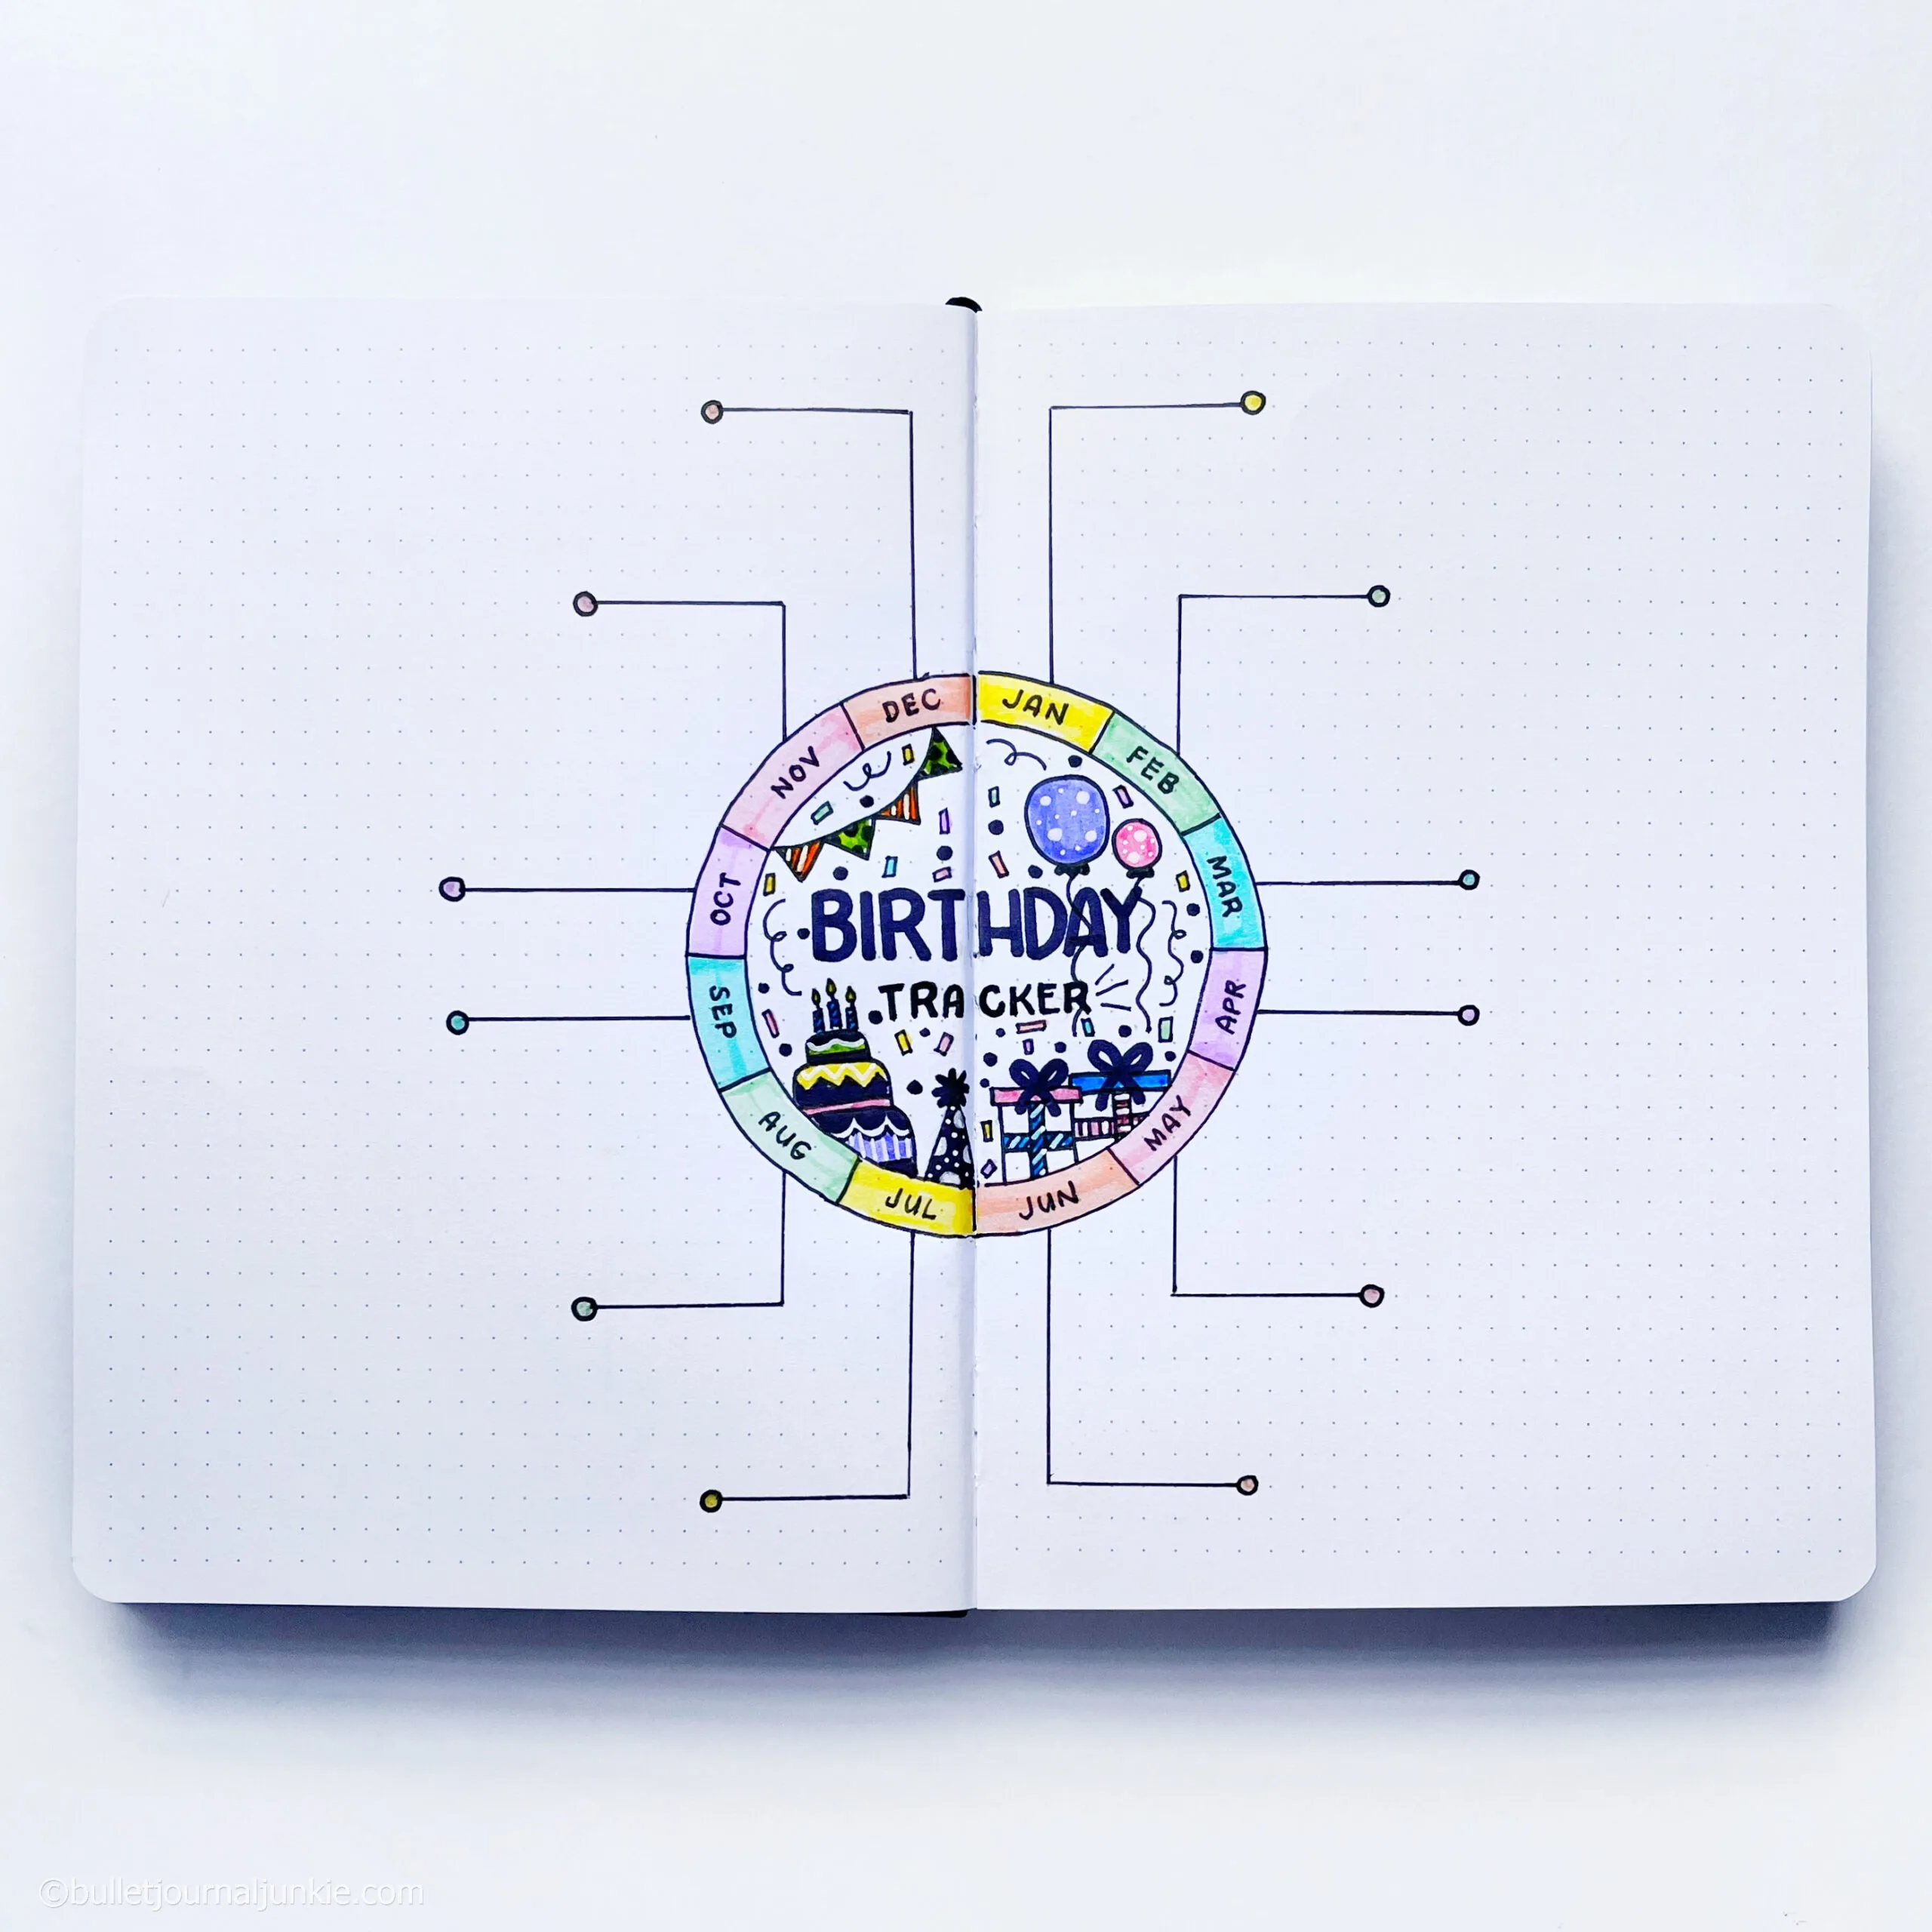 A bullet journal layout to track birthdays, on the page of an open journal.